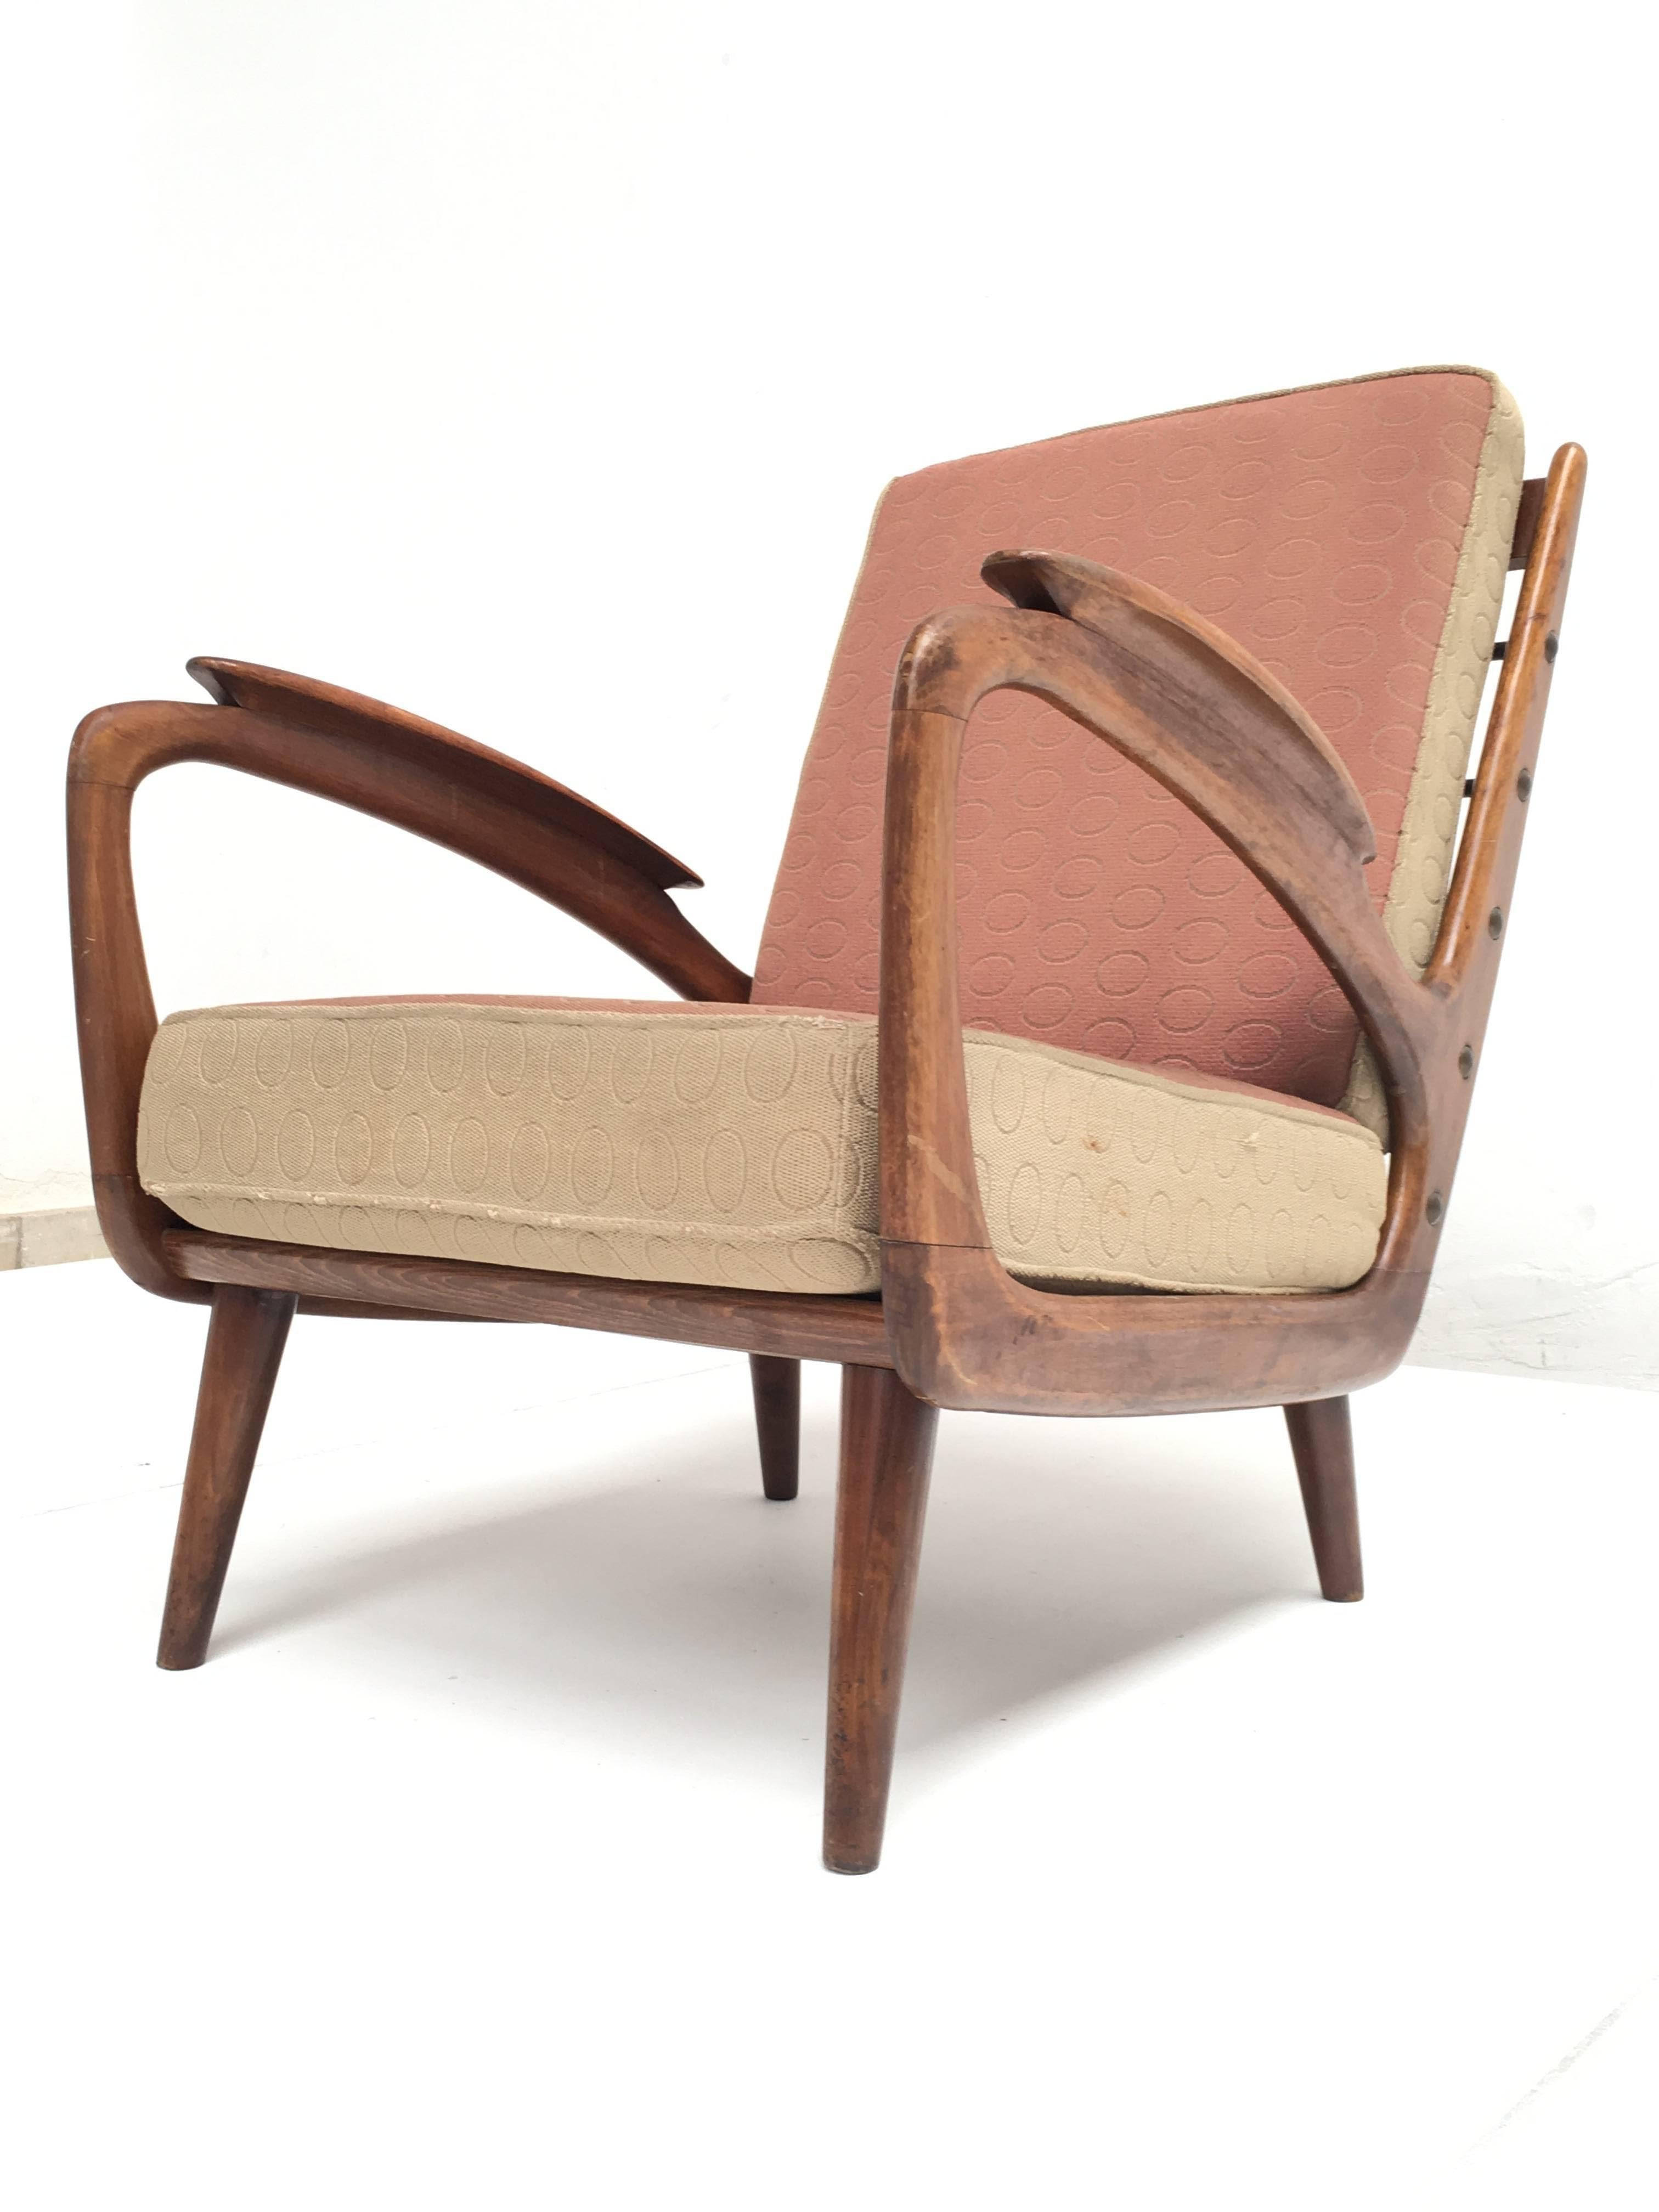 This lounge chair is most likely produced by Dutch Manufacturer 'De Ster' who was the predecessor of Gelderland and produced stunning top quality organic Scandinavian styled furniture in the 1950s

The frame is made of solid carved and walnut